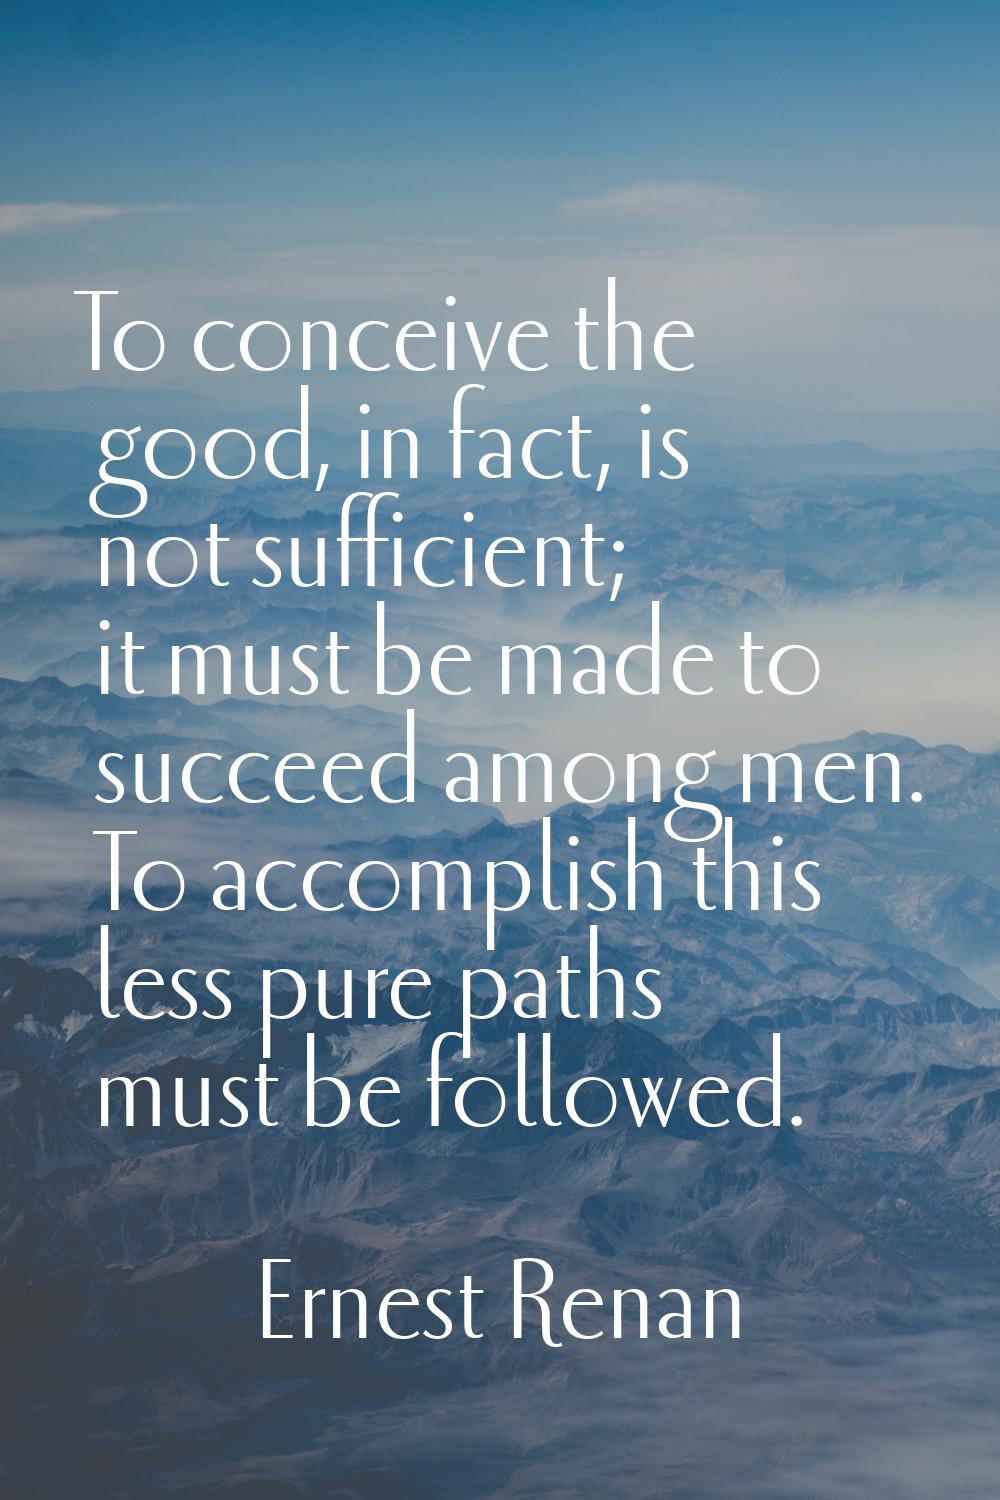 To conceive the good, in fact, is not sufficient; it must be made to succeed among men. To accompli